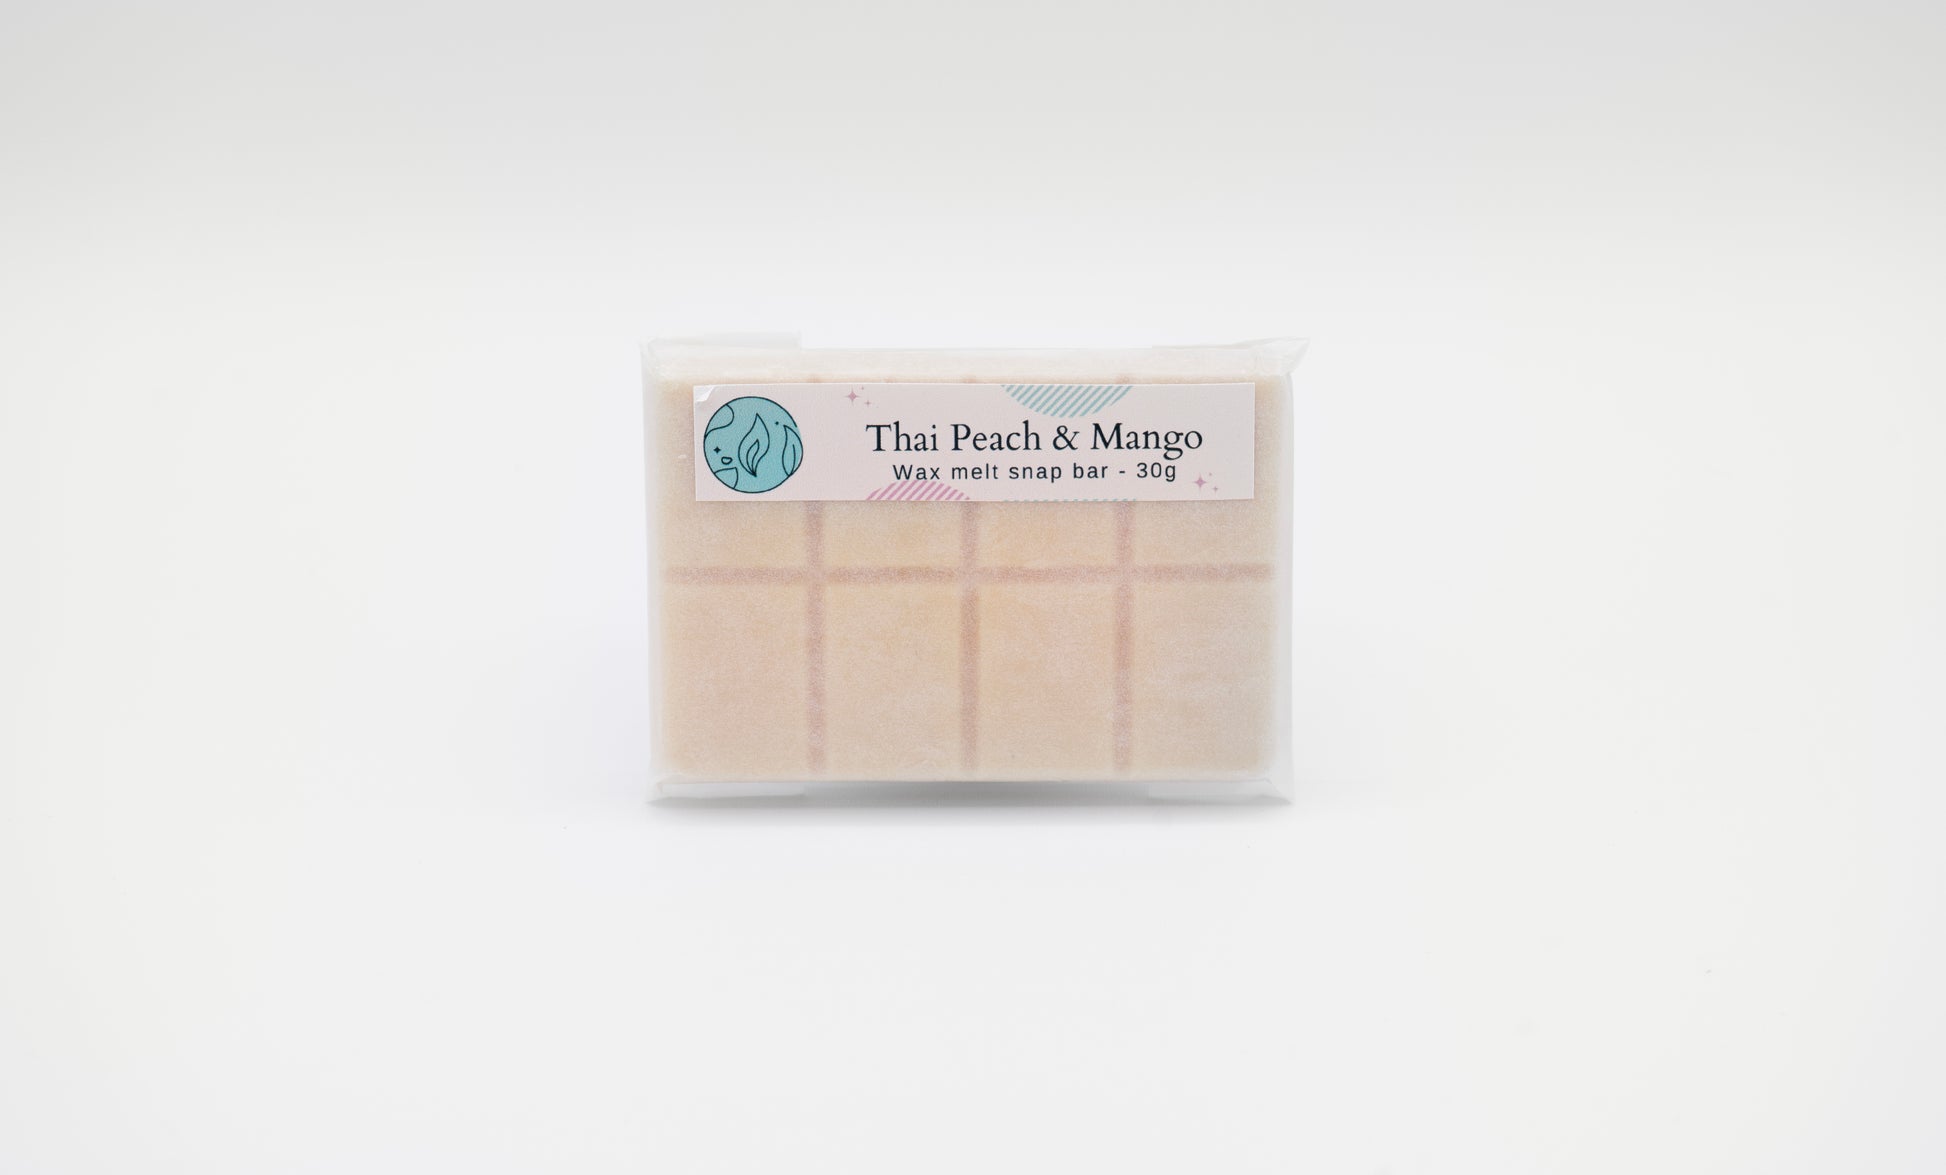 Thai peach and mango scented 30g or 90g strongly scented wax melt snap bars. Eco friendly waxed paper packaging. Brighton Rock Workshop wax melts made in Spain and the United Kingdom, available in two sizes. Suitable for tea light or electric burners